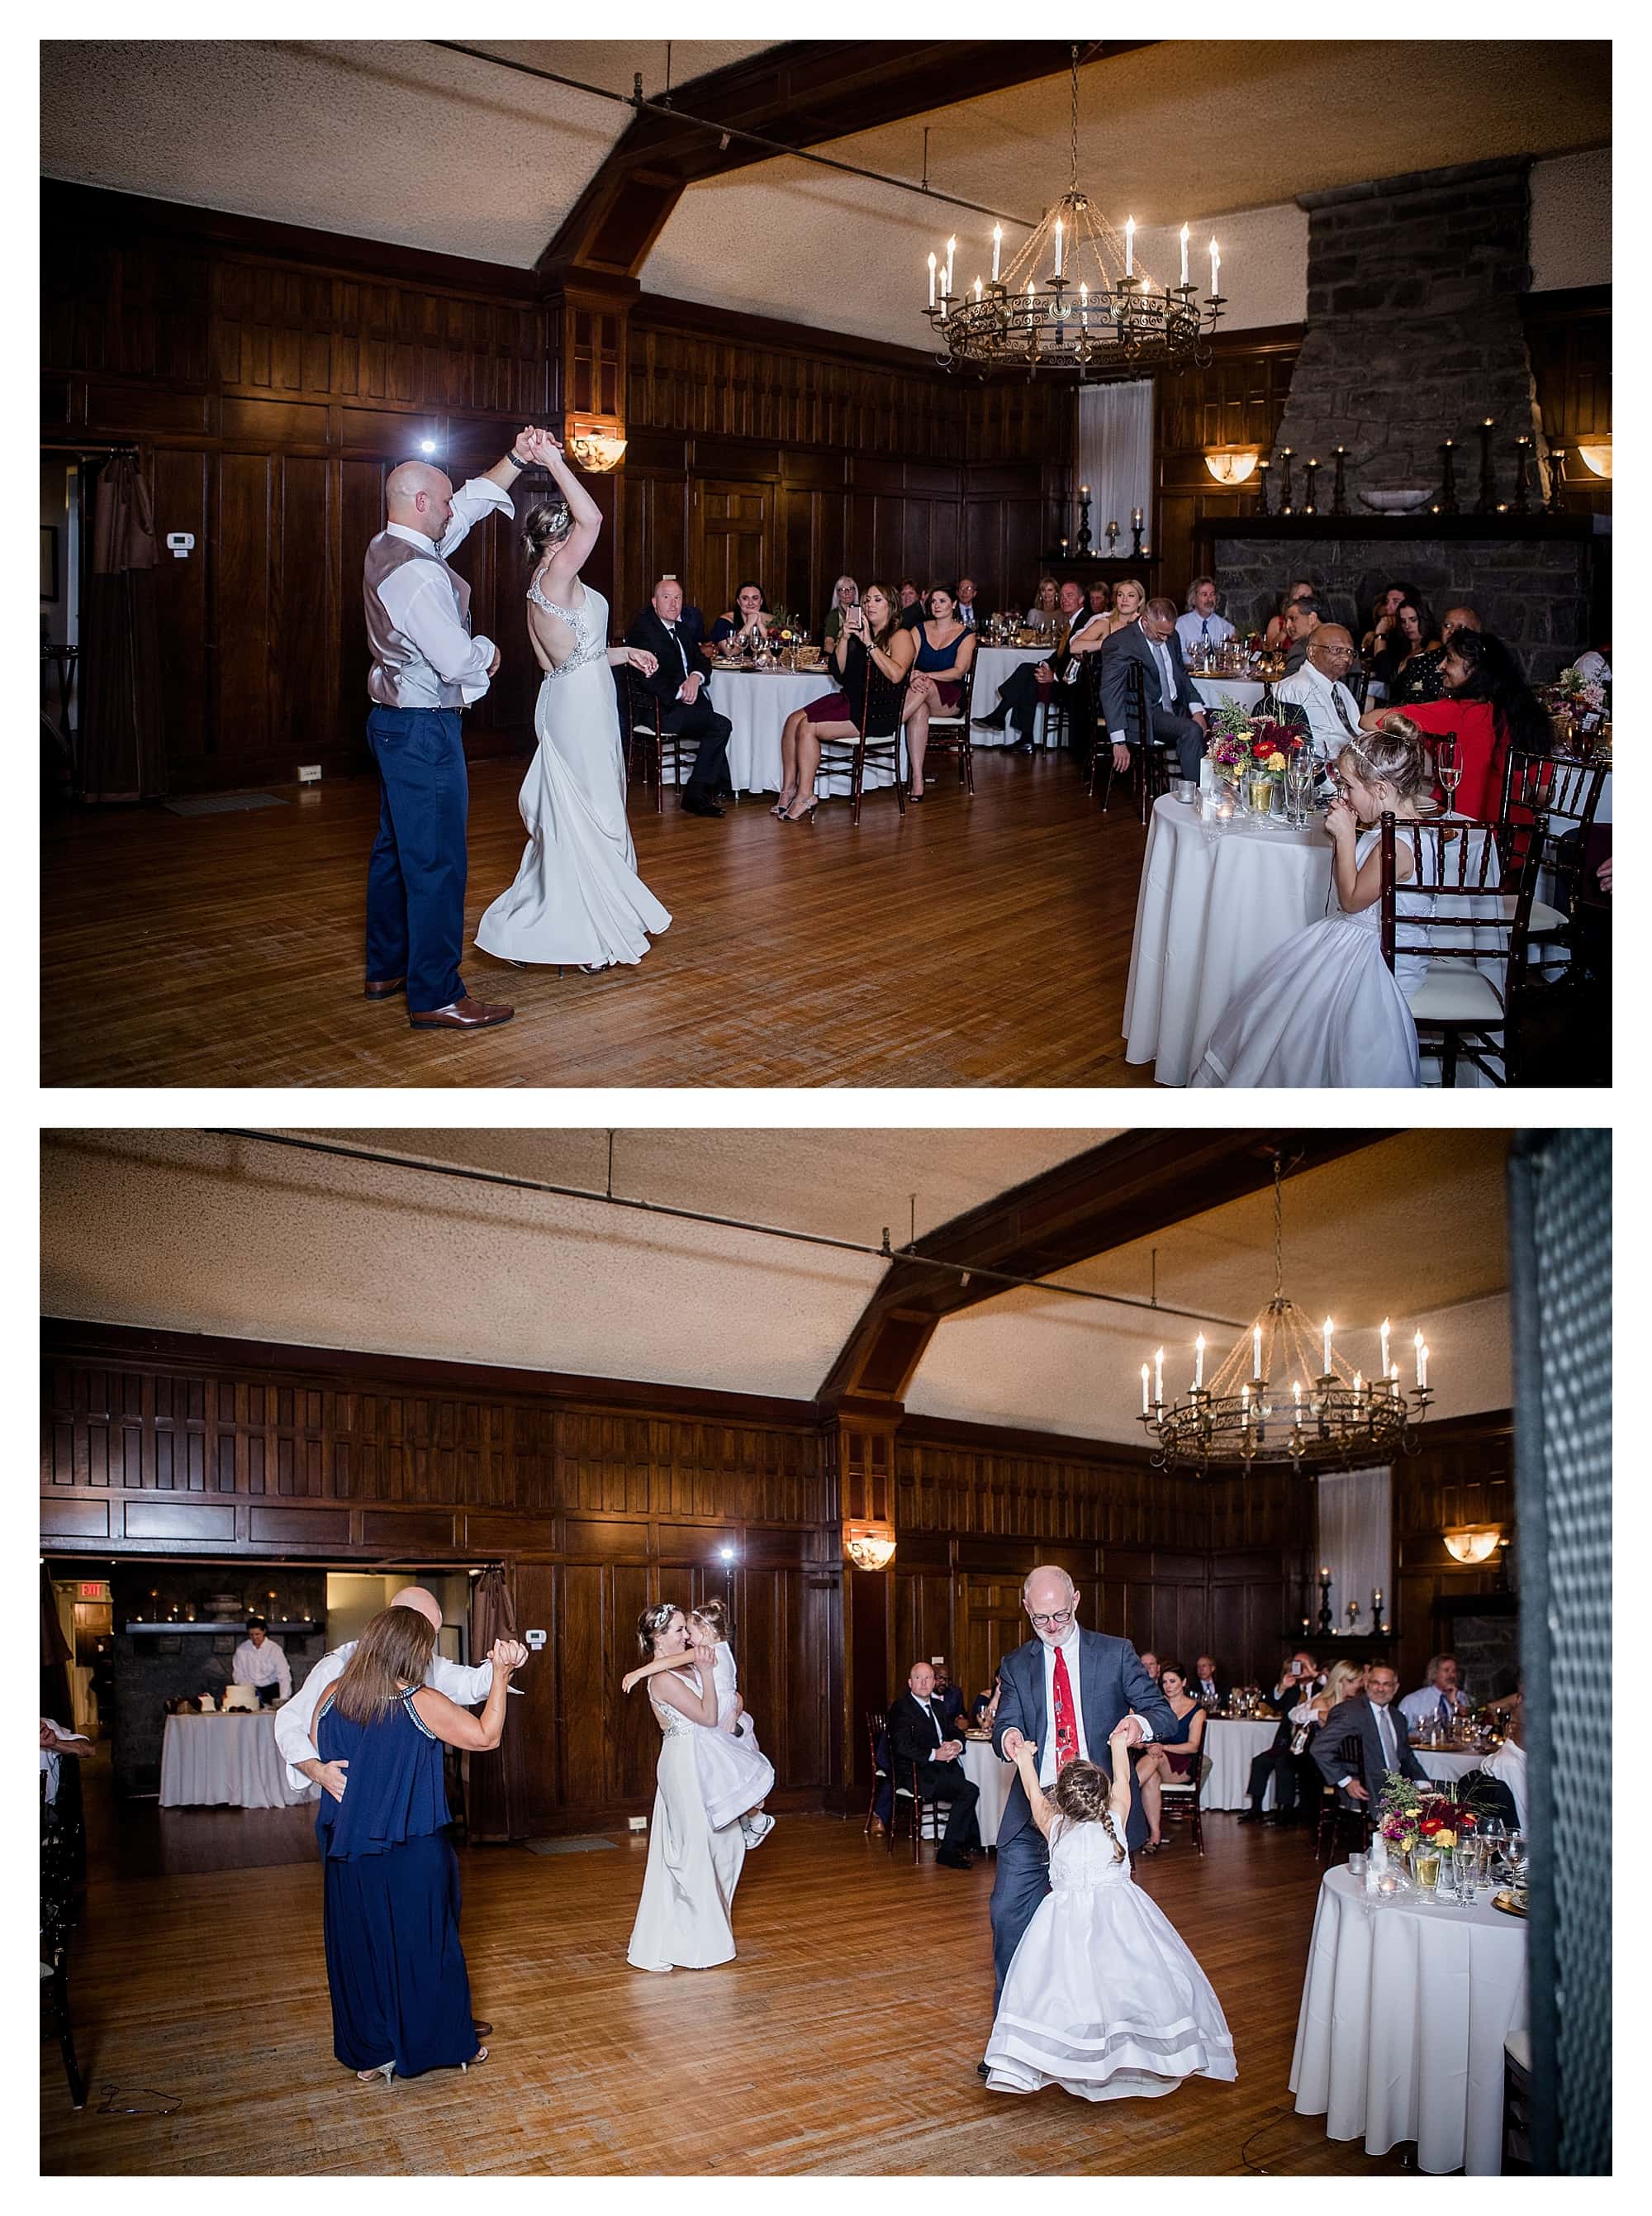 Bride and Groom dance with parents and kids